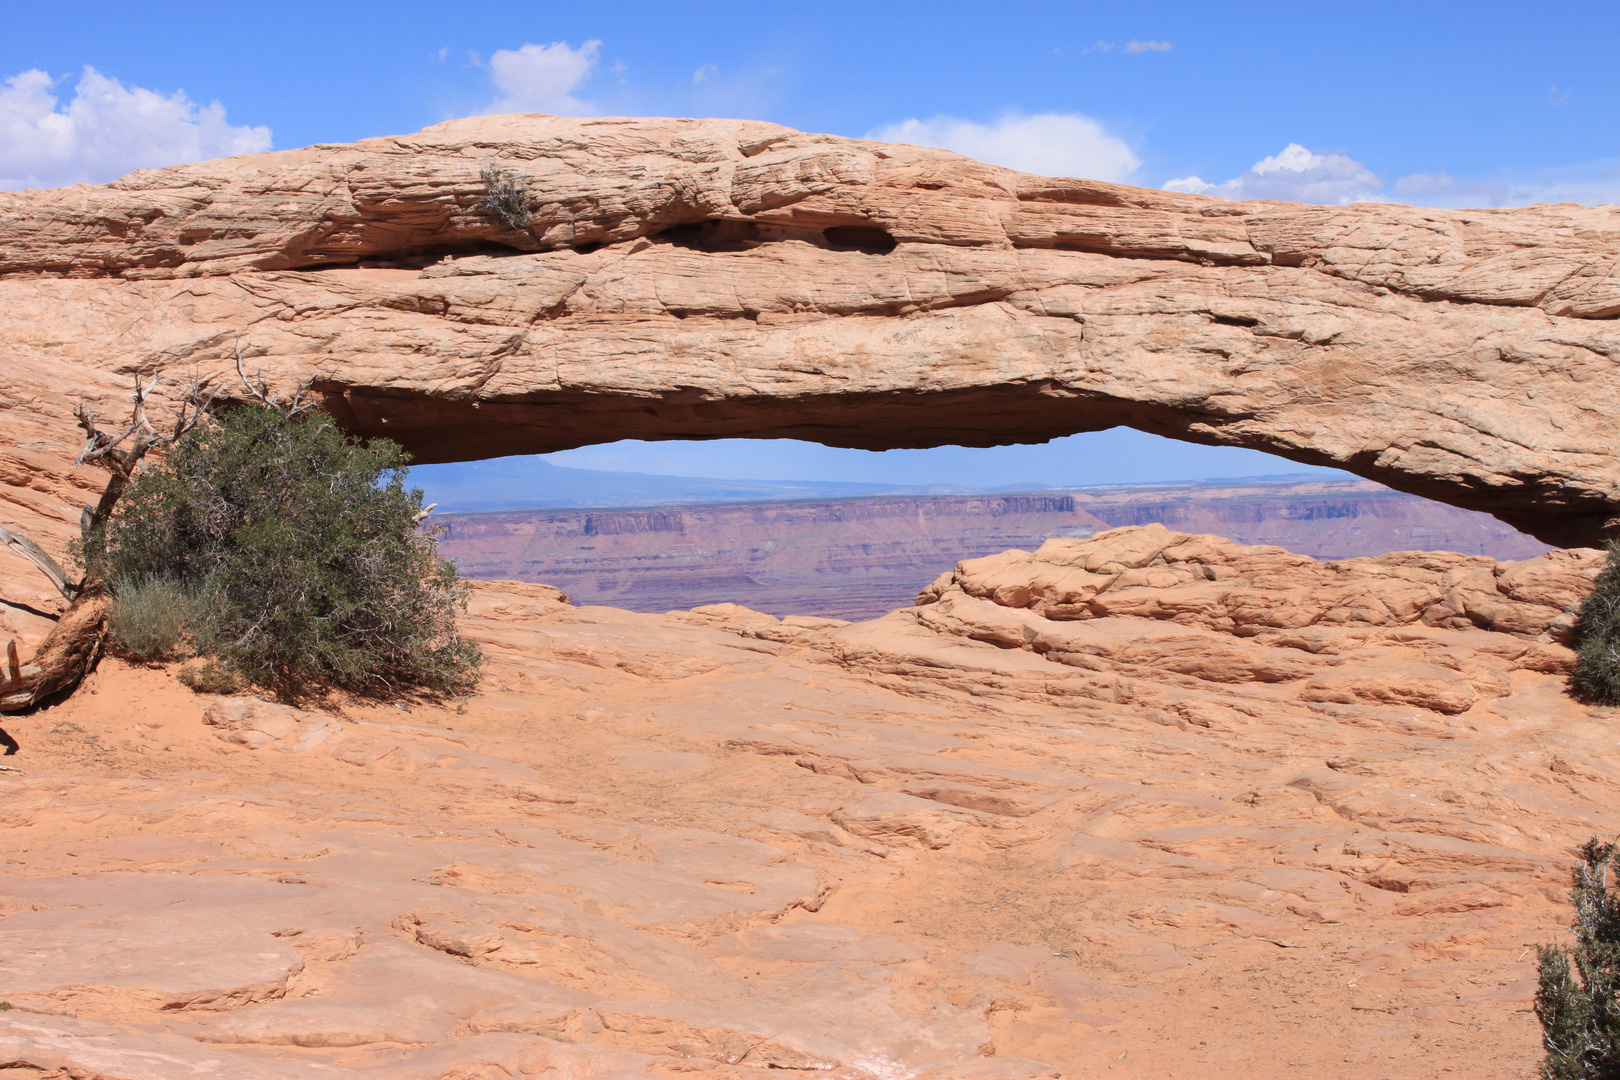 Arch in Canyonlands NP, Moab